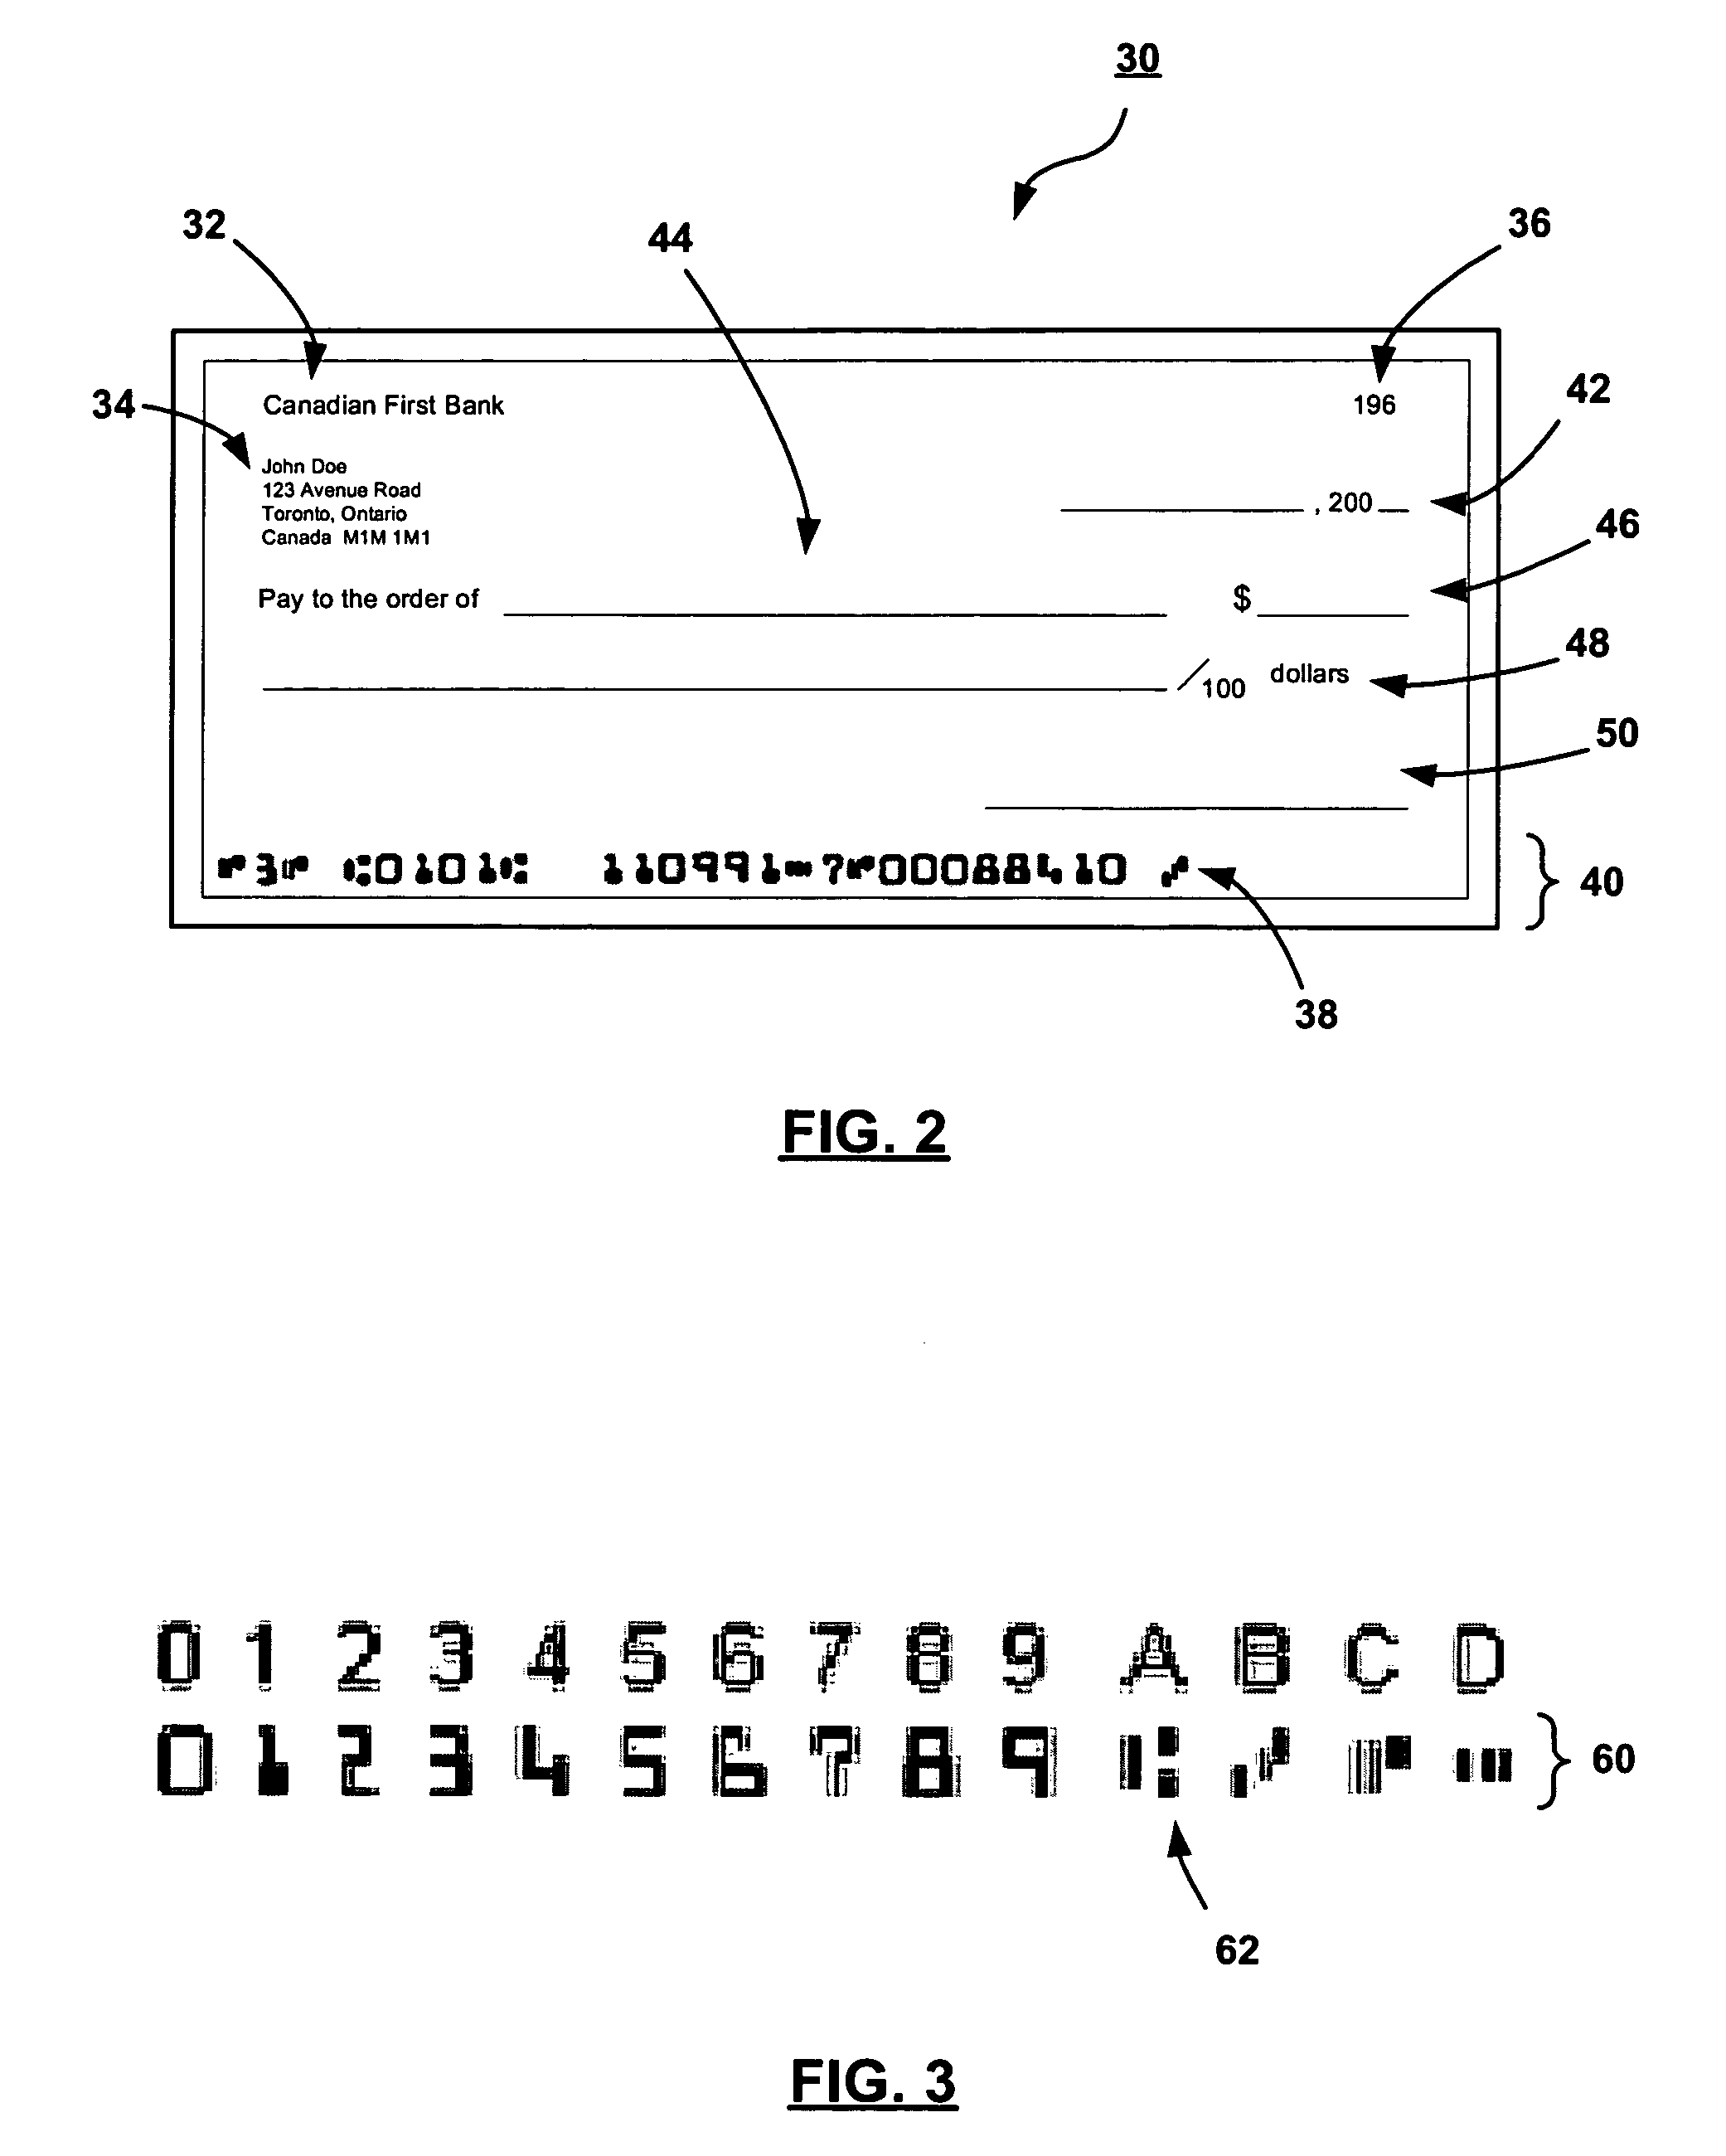 Method and system for recognizing a candidate character in a captured image